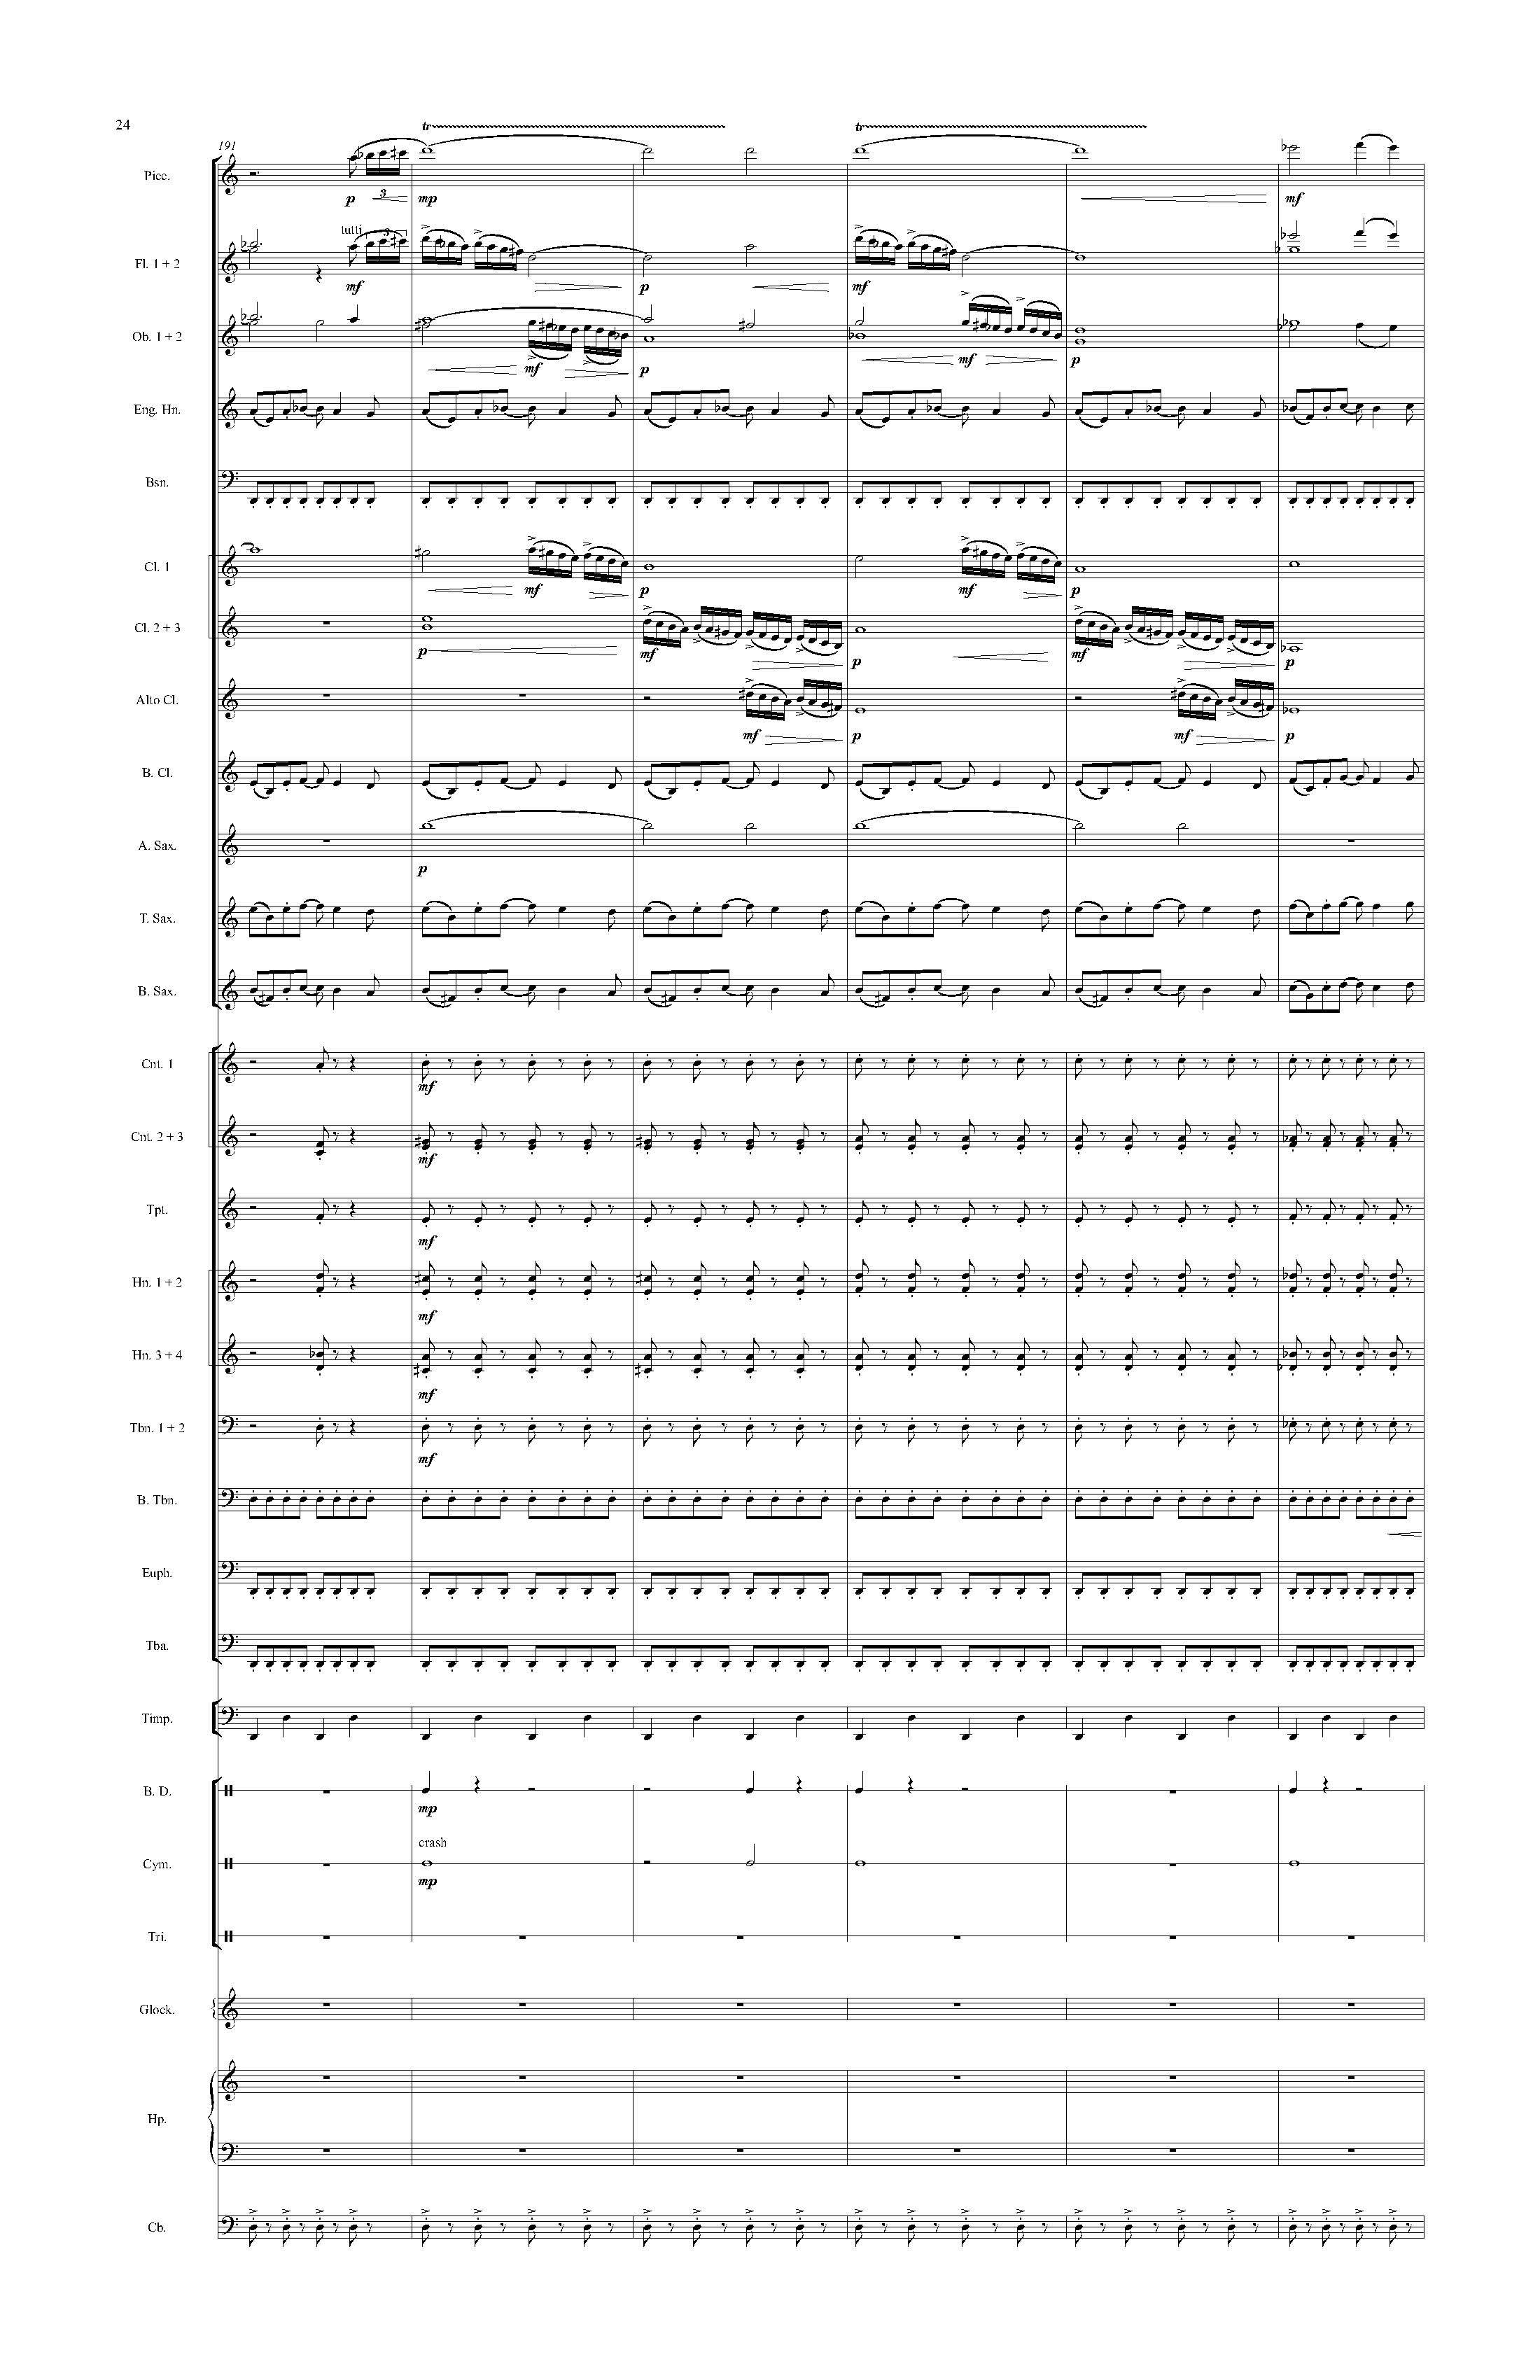 Psyche - Complete Score_Page_30.jpg